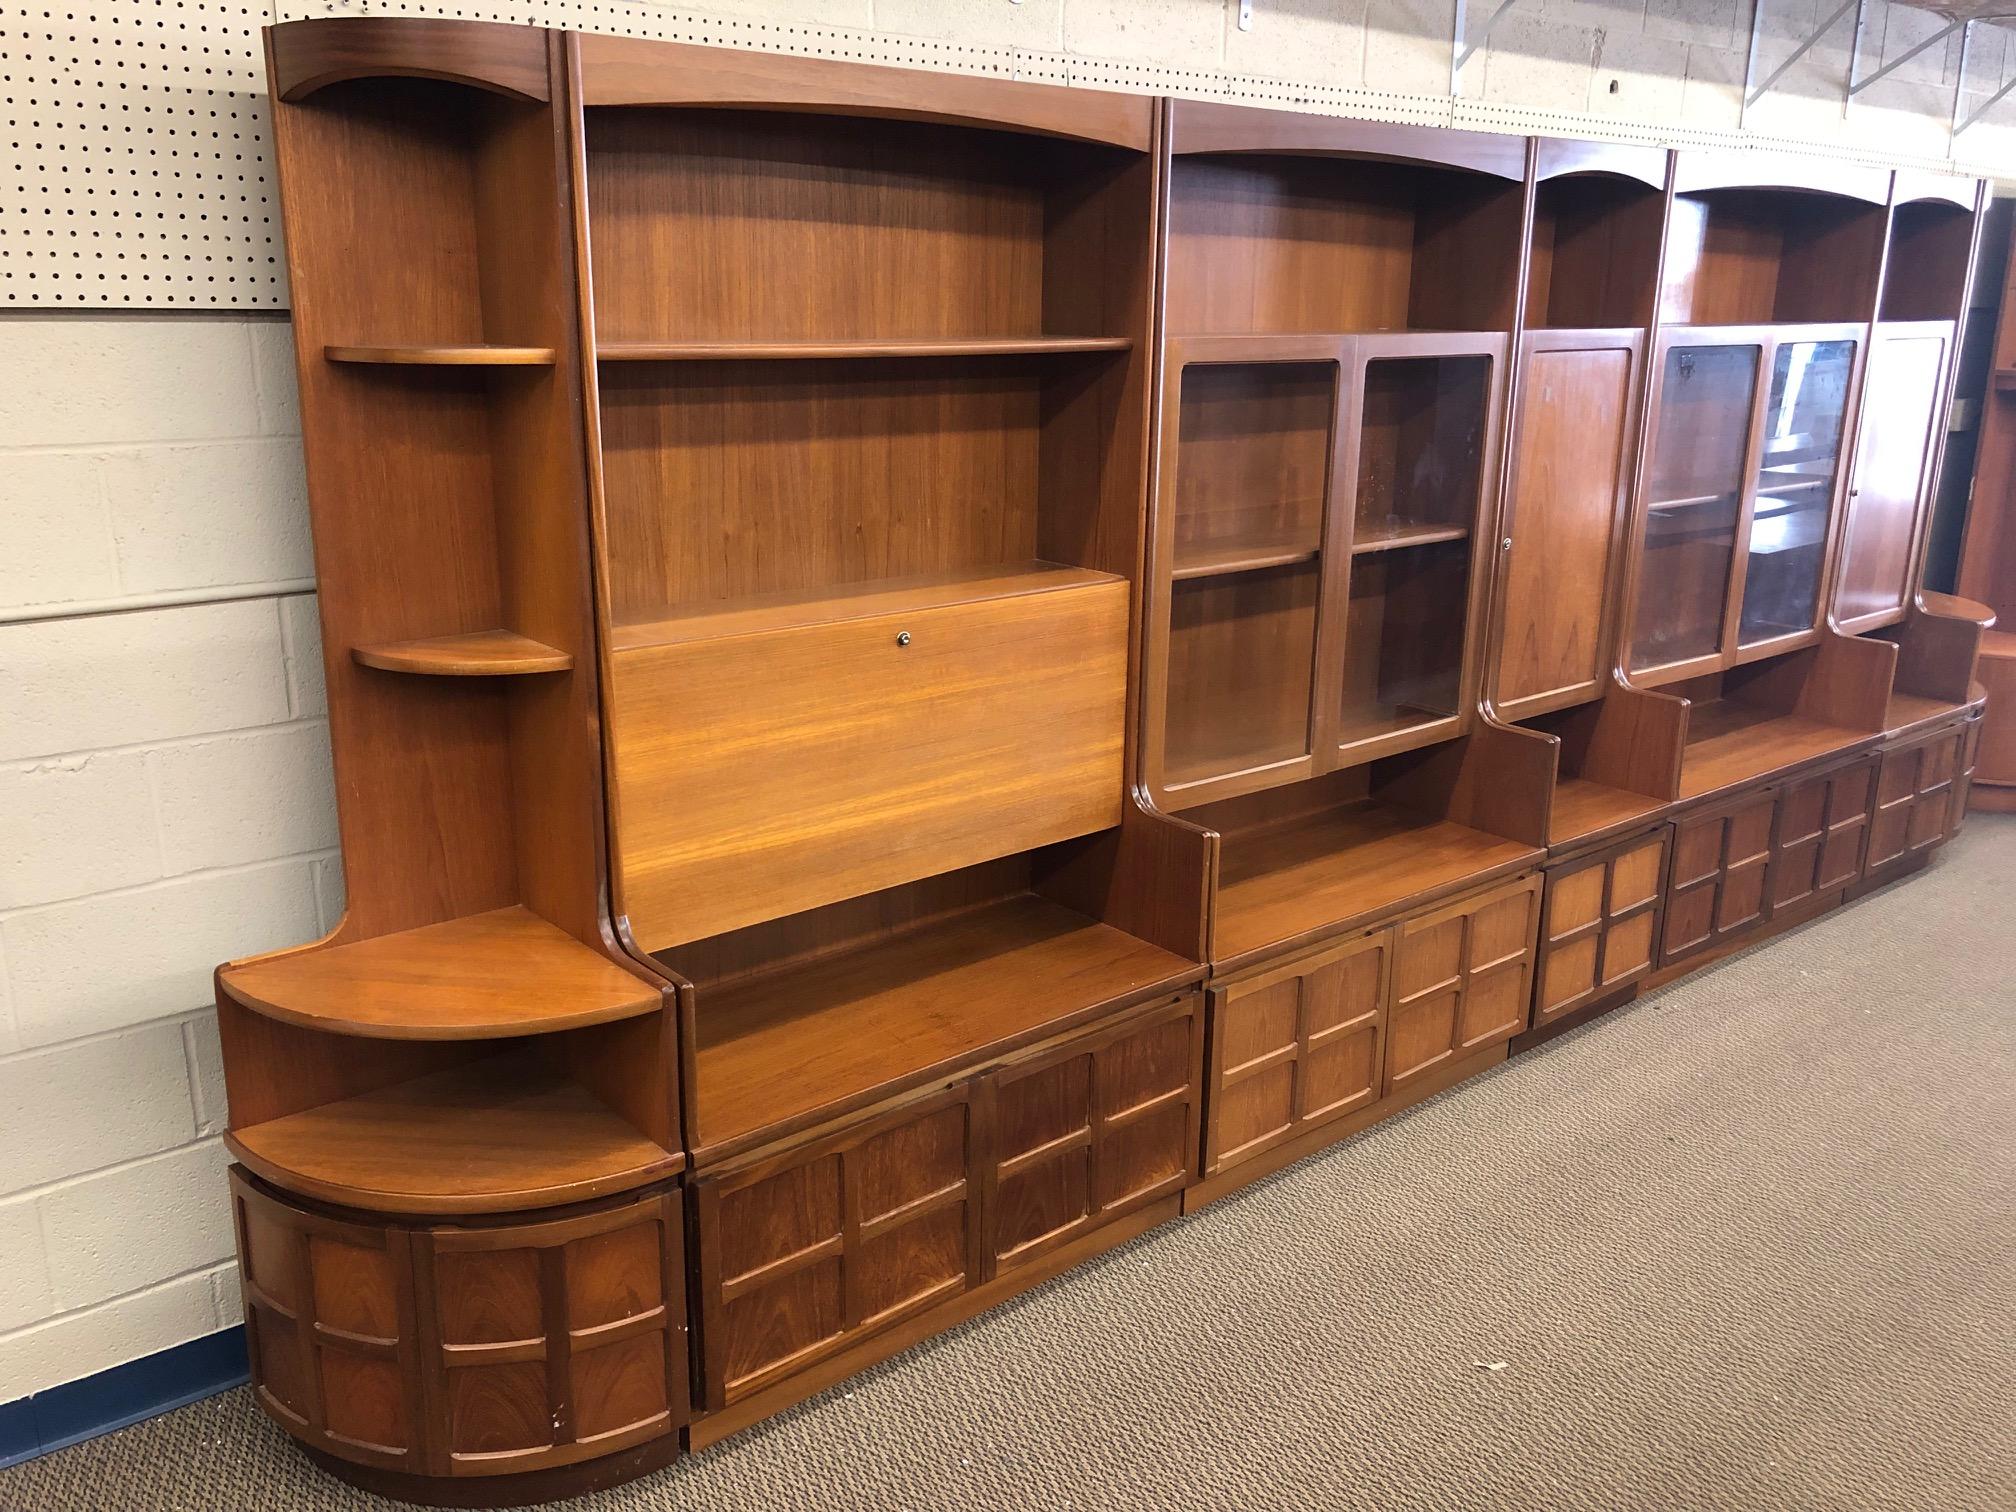 Fantastic teak wall unit made by Nathan Furniture. Made in England. Can be arranged anyway you like. The photo shows just one possible set up.

Features 2 smaller corner units and 3 wide main units and 2 narrow main units. One main unit has a drop